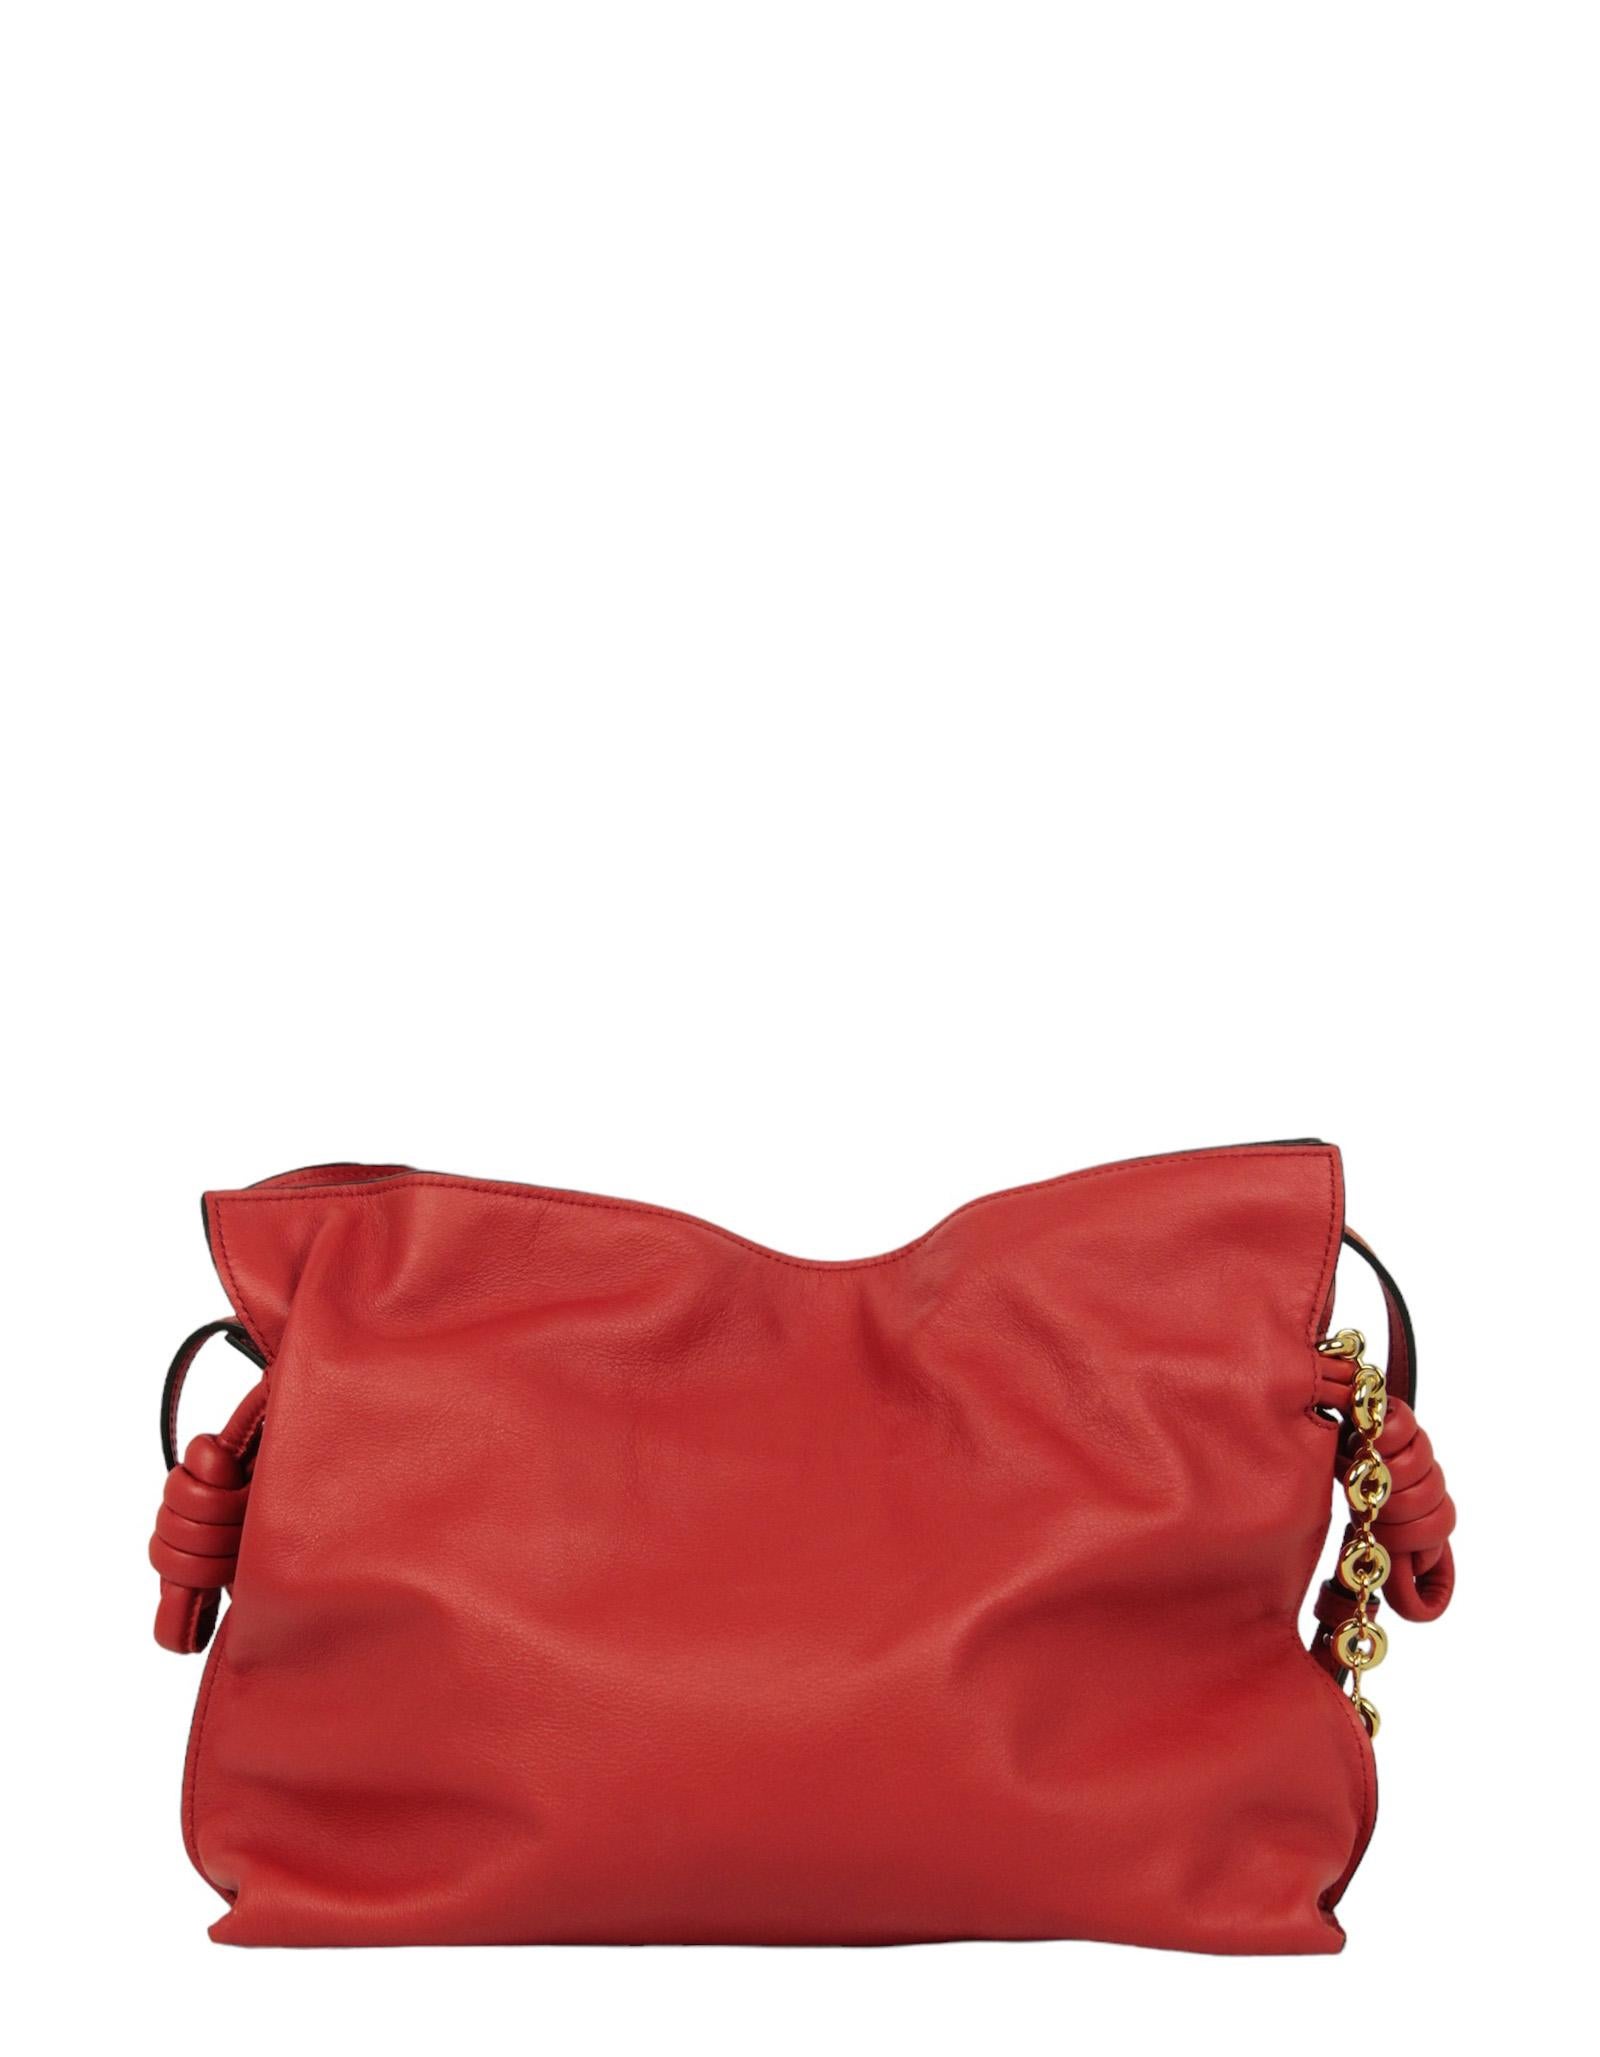 Loewe Red Calfskin Leather Flamenco Bag w/ Donut Chain In Excellent Condition For Sale In New York, NY